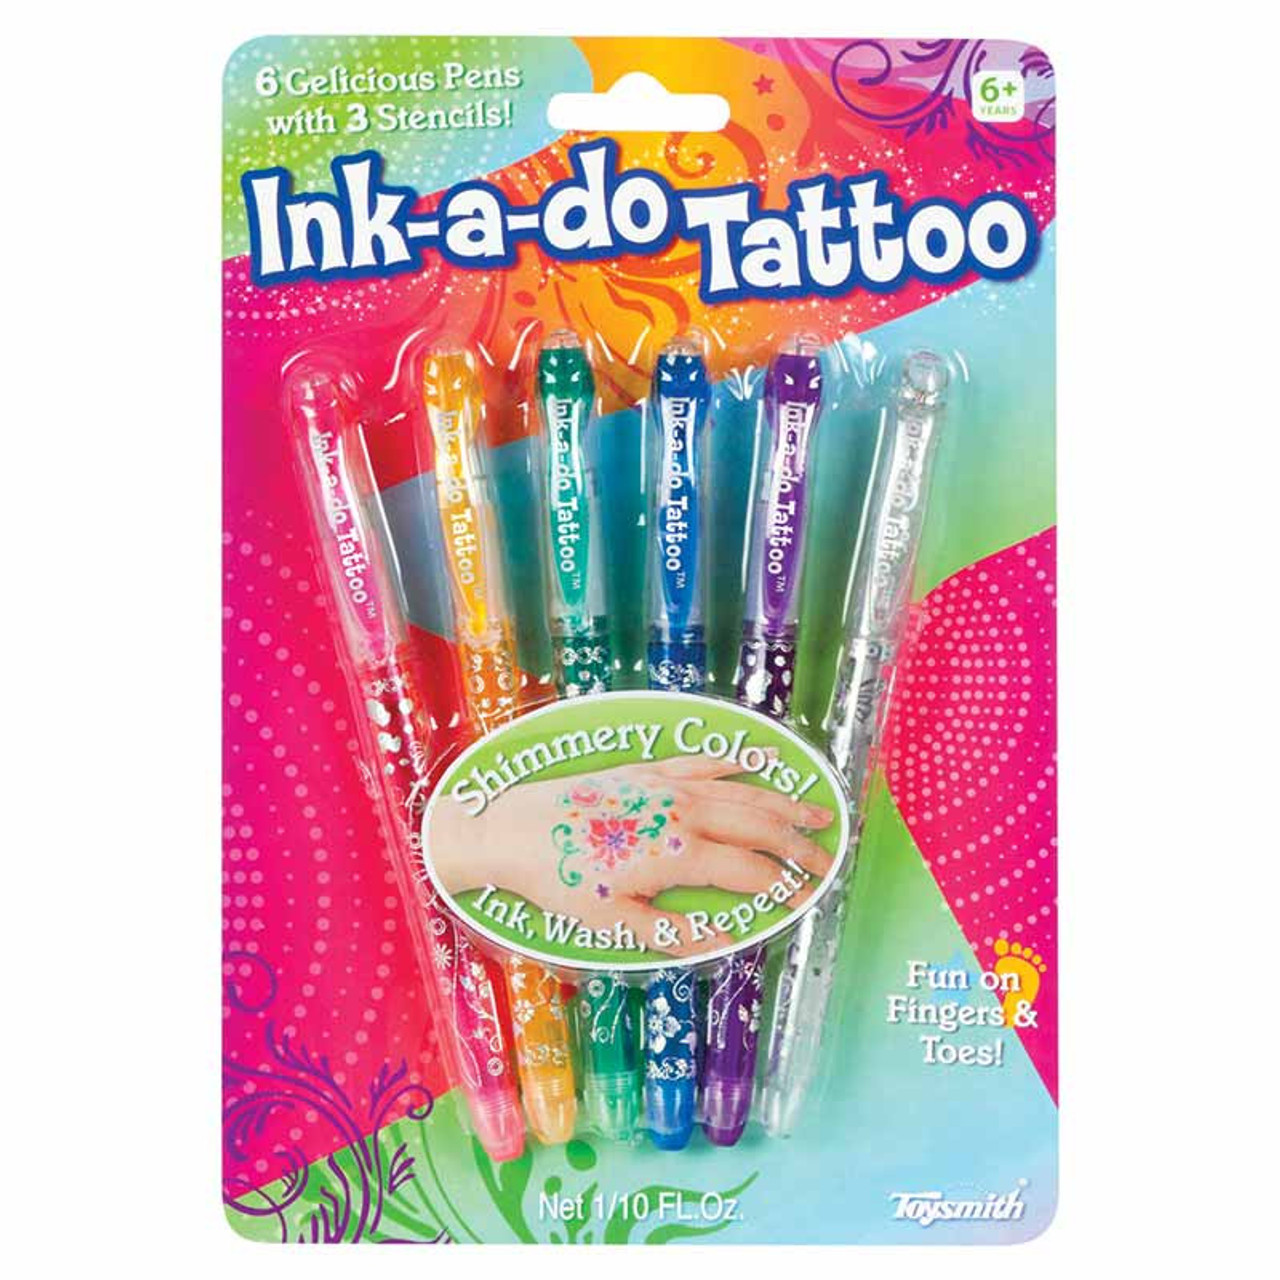 Inksup The Authorized dealer in... - AVA Tattoo Supply | Facebook